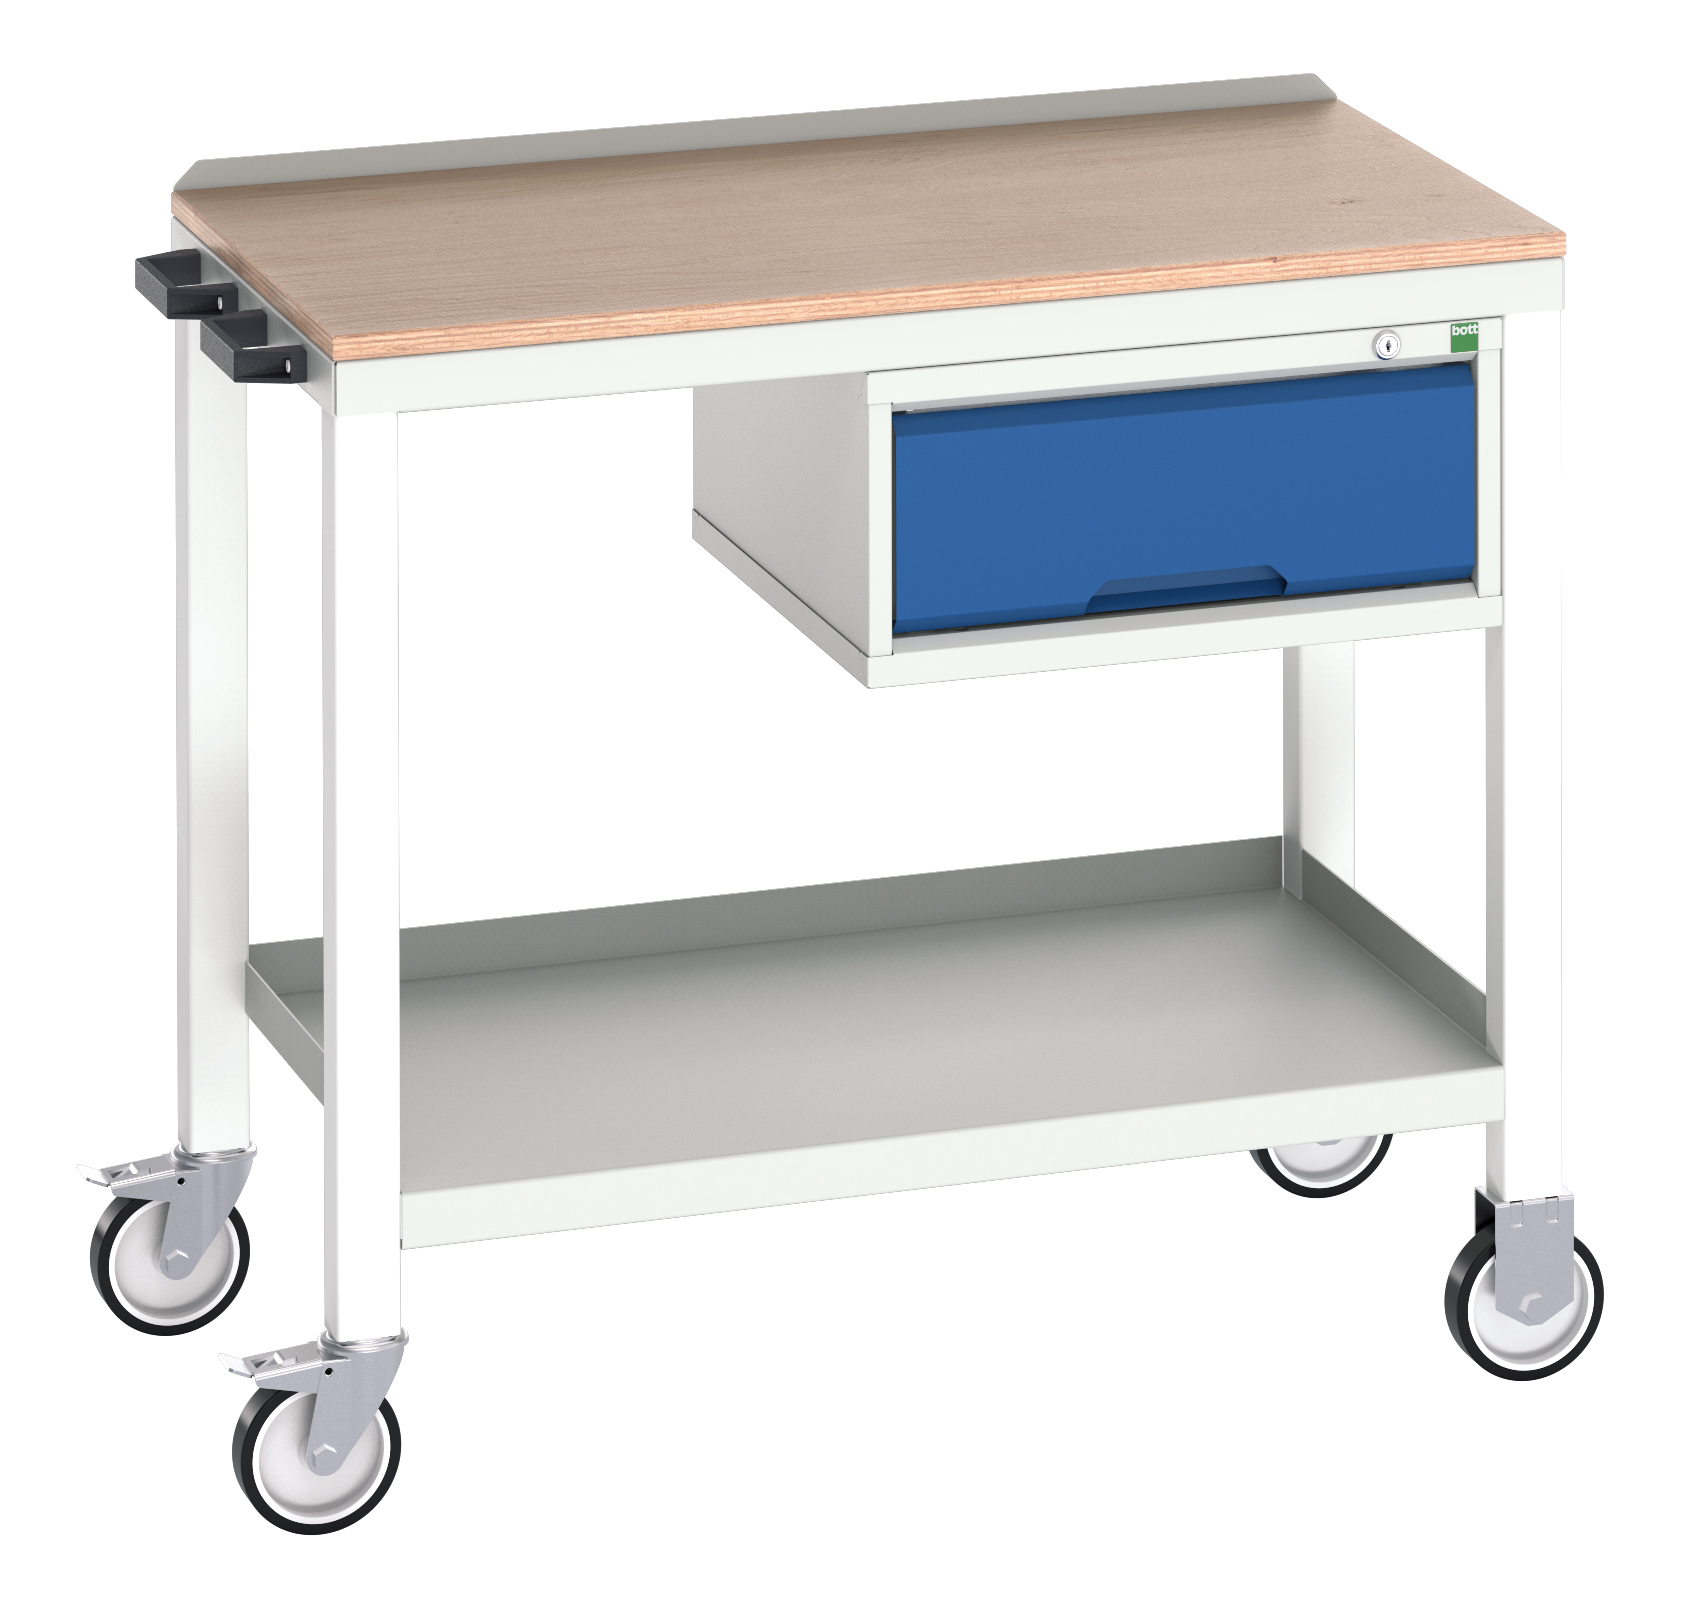 Bott Verso Mobile Welded Bench With 1 Drawer Cabinet - 16922801.11